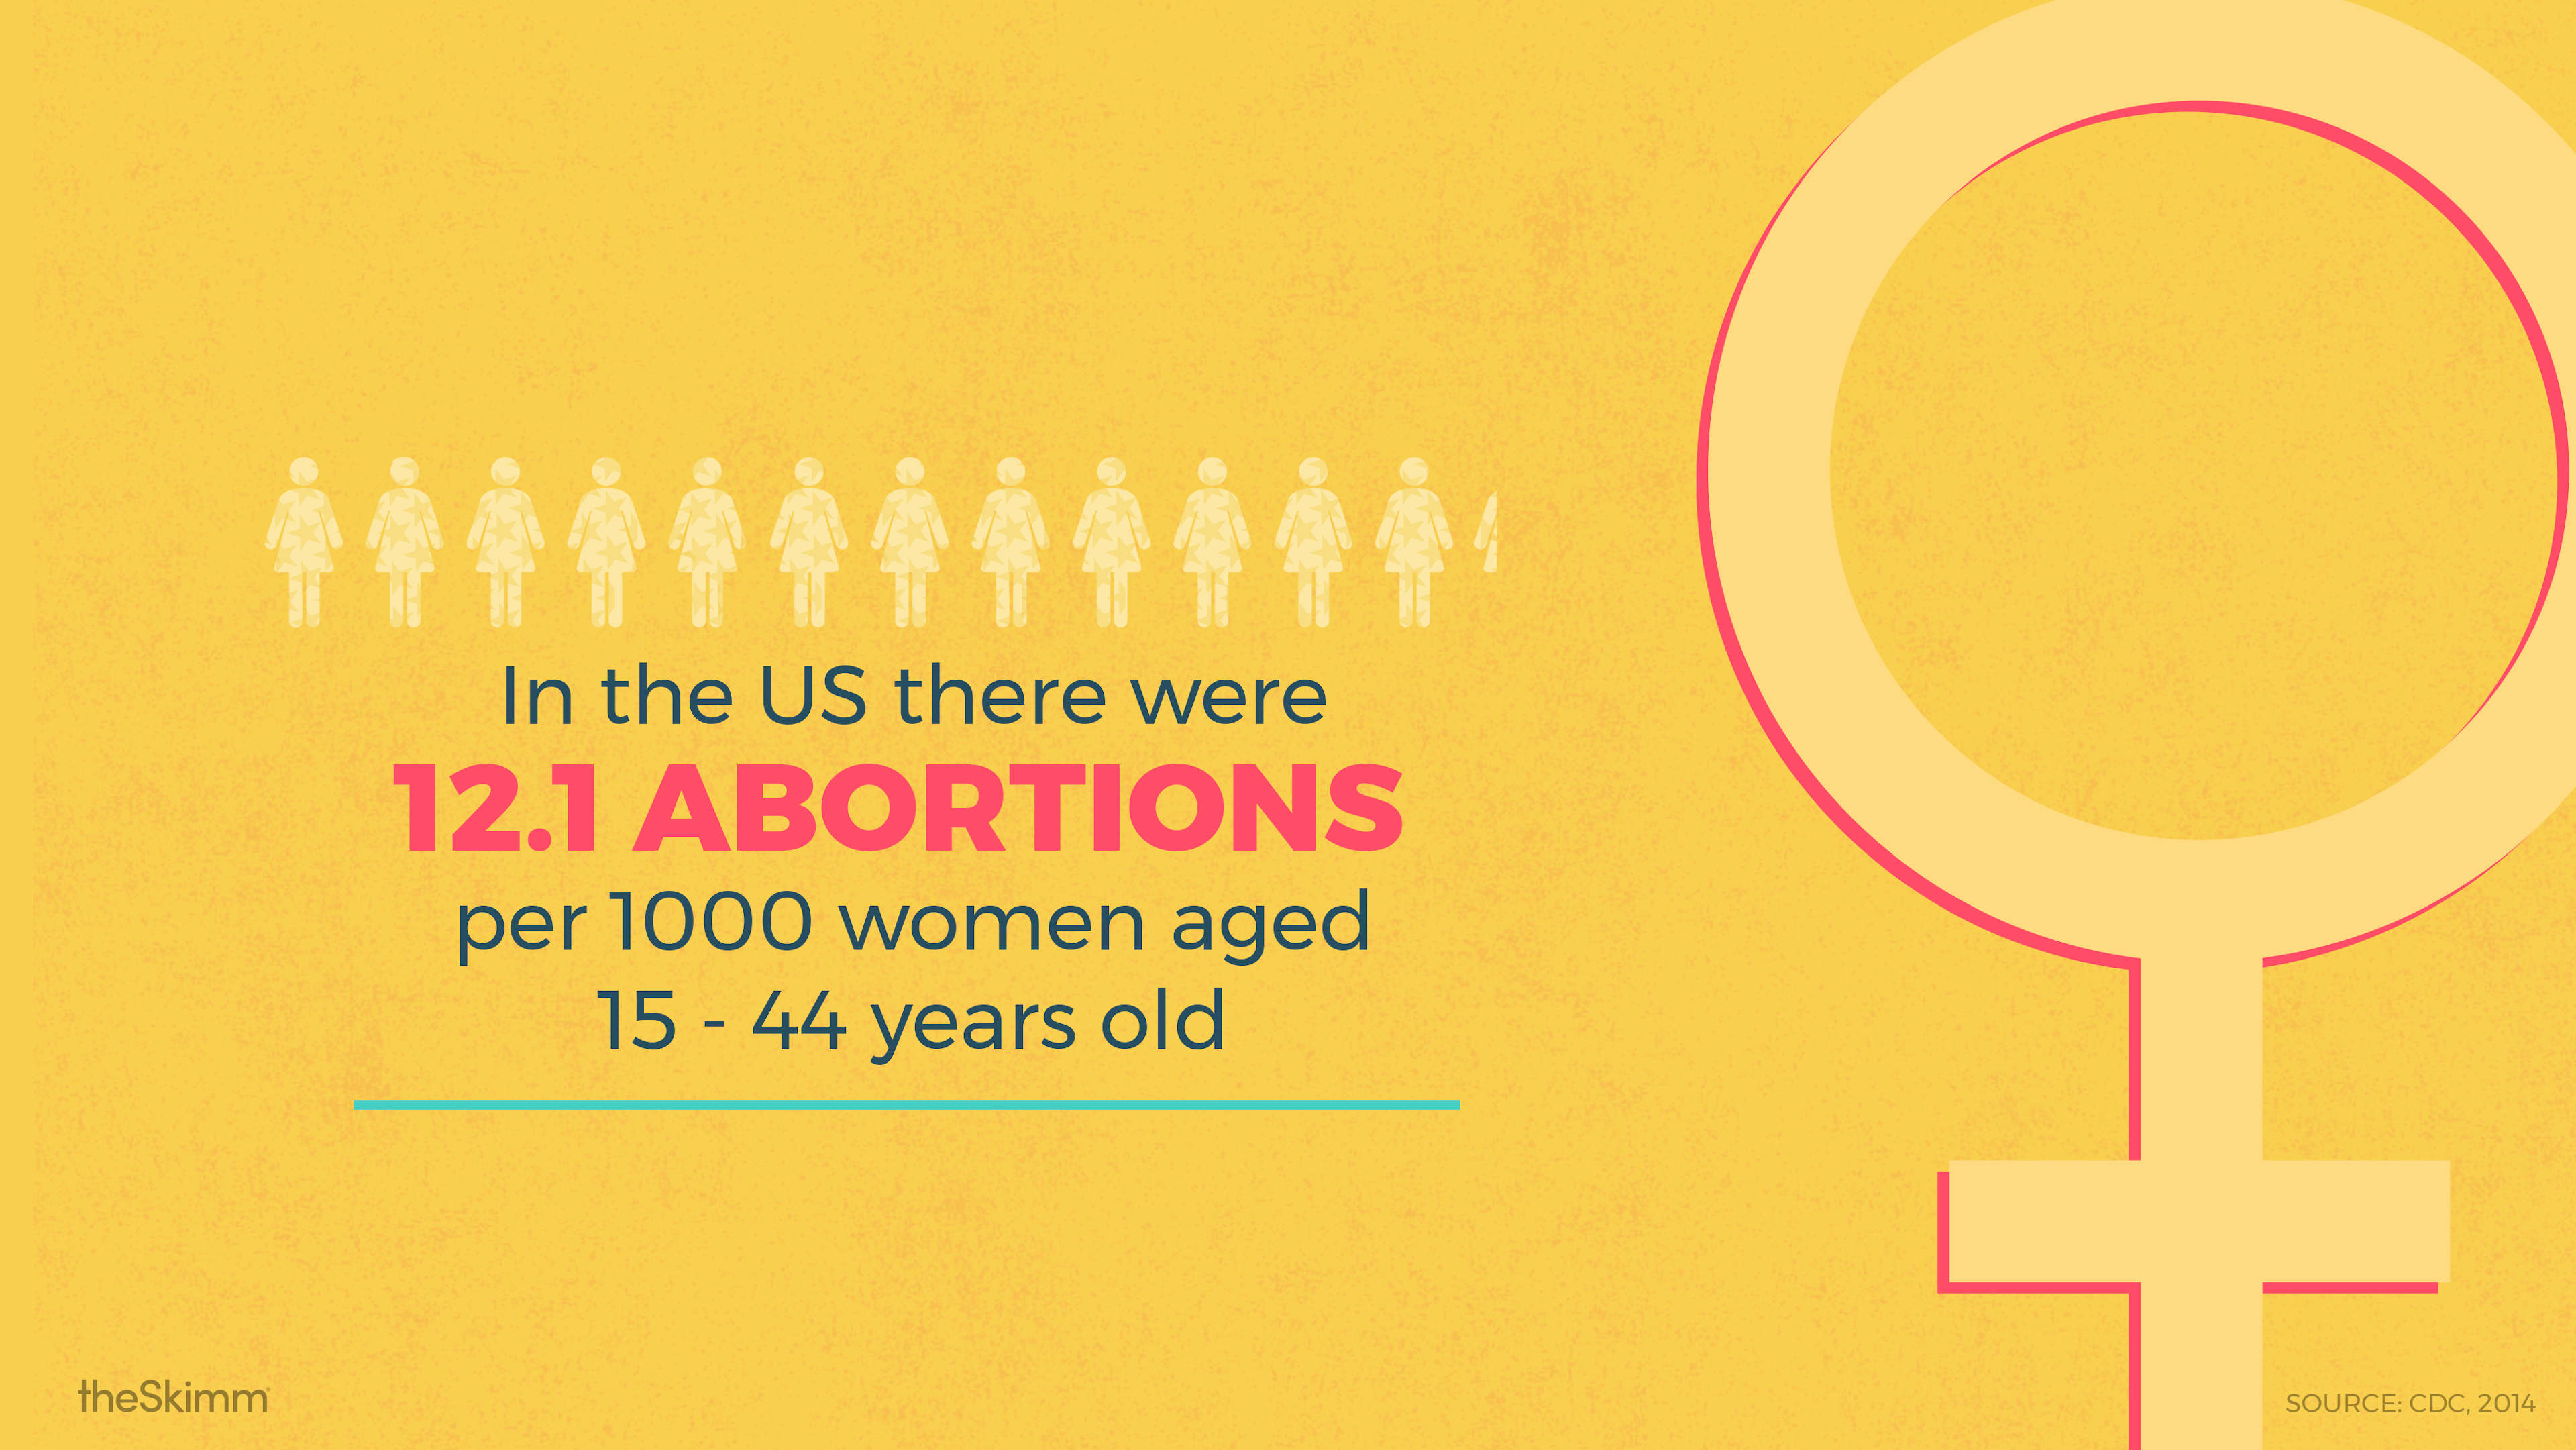 In the US there were 12.1 abortions per 1000 women aged 15-44 years old